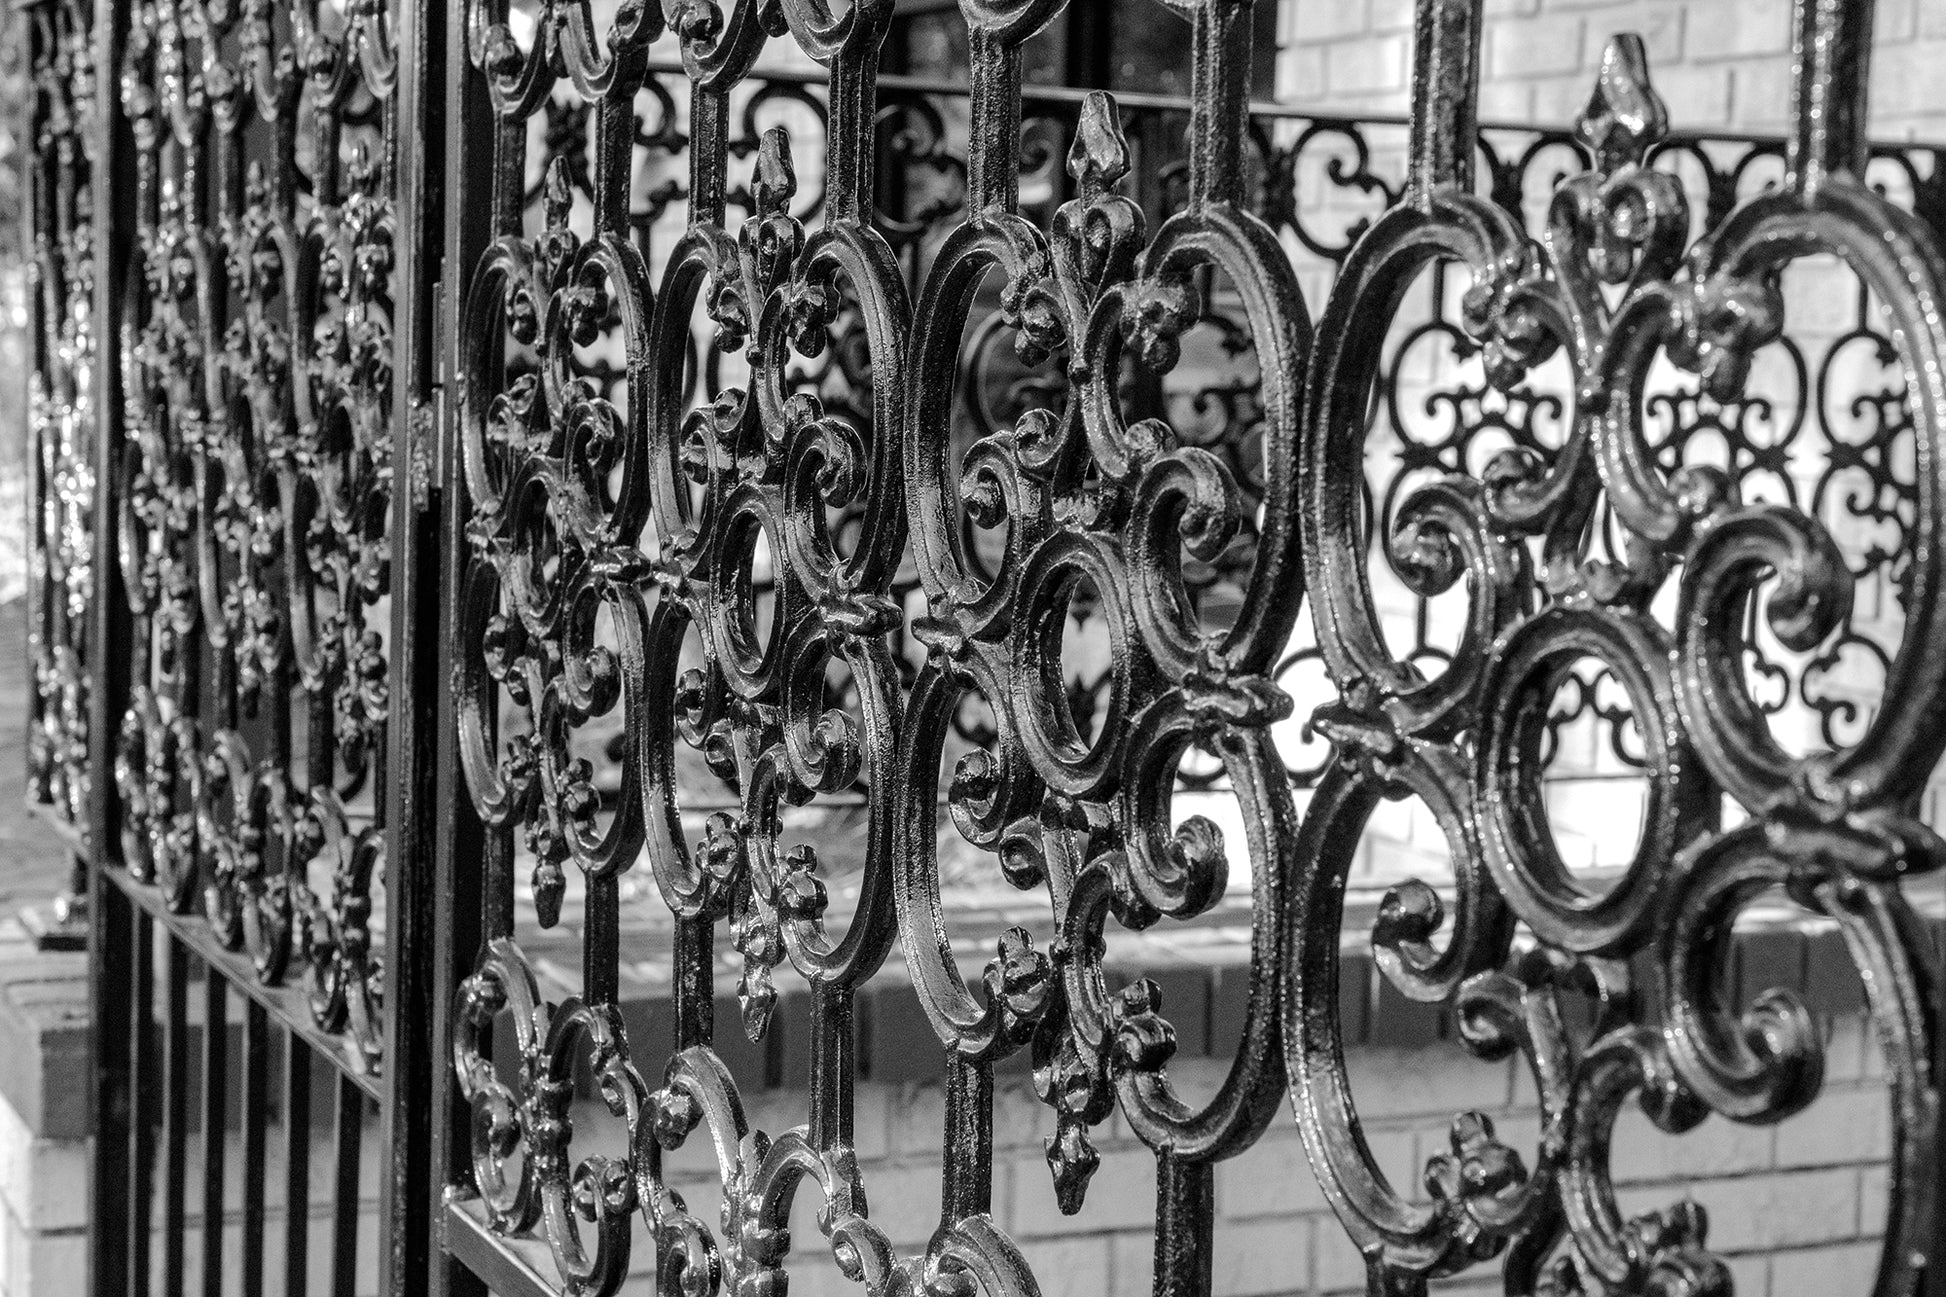 Architectural / Industrial / Cityscape Abstract Decor Black and White Old Wrought Iron Fence Savannah Ga Loose Wall Art Print 